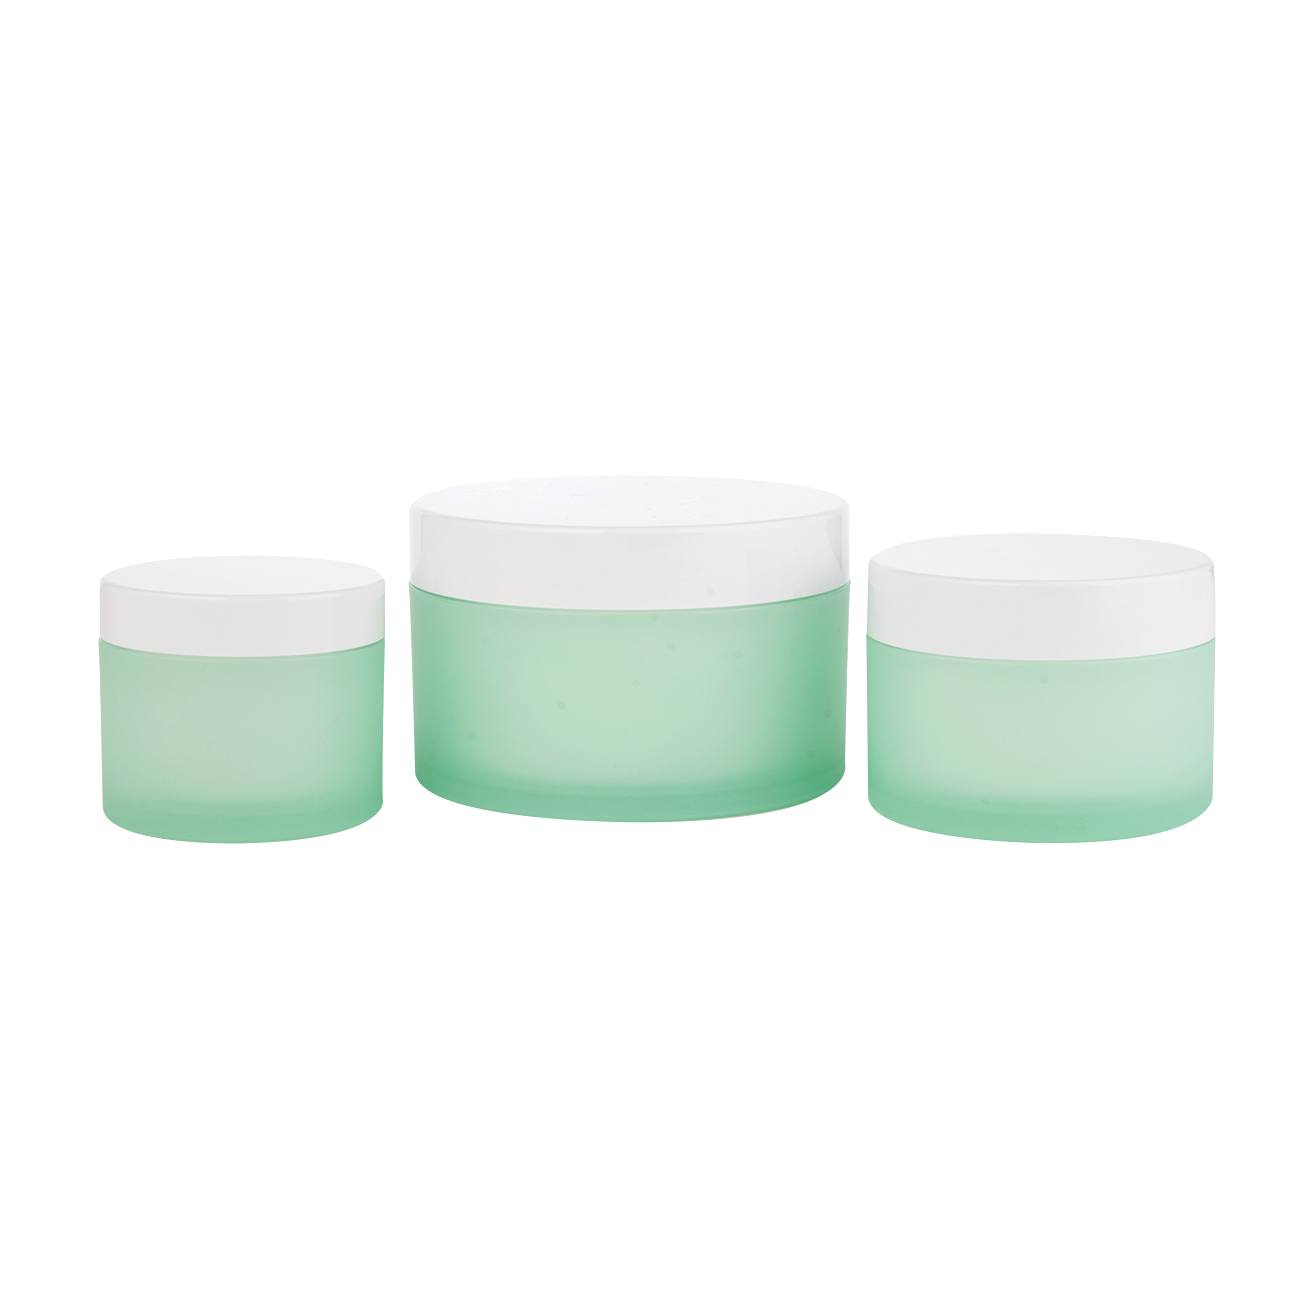 50g 60g 100g 240g Sustainable Cosmetic Packaging Refillable Cosmetic Jar Wholesale Eco-Friendly Cream Jar